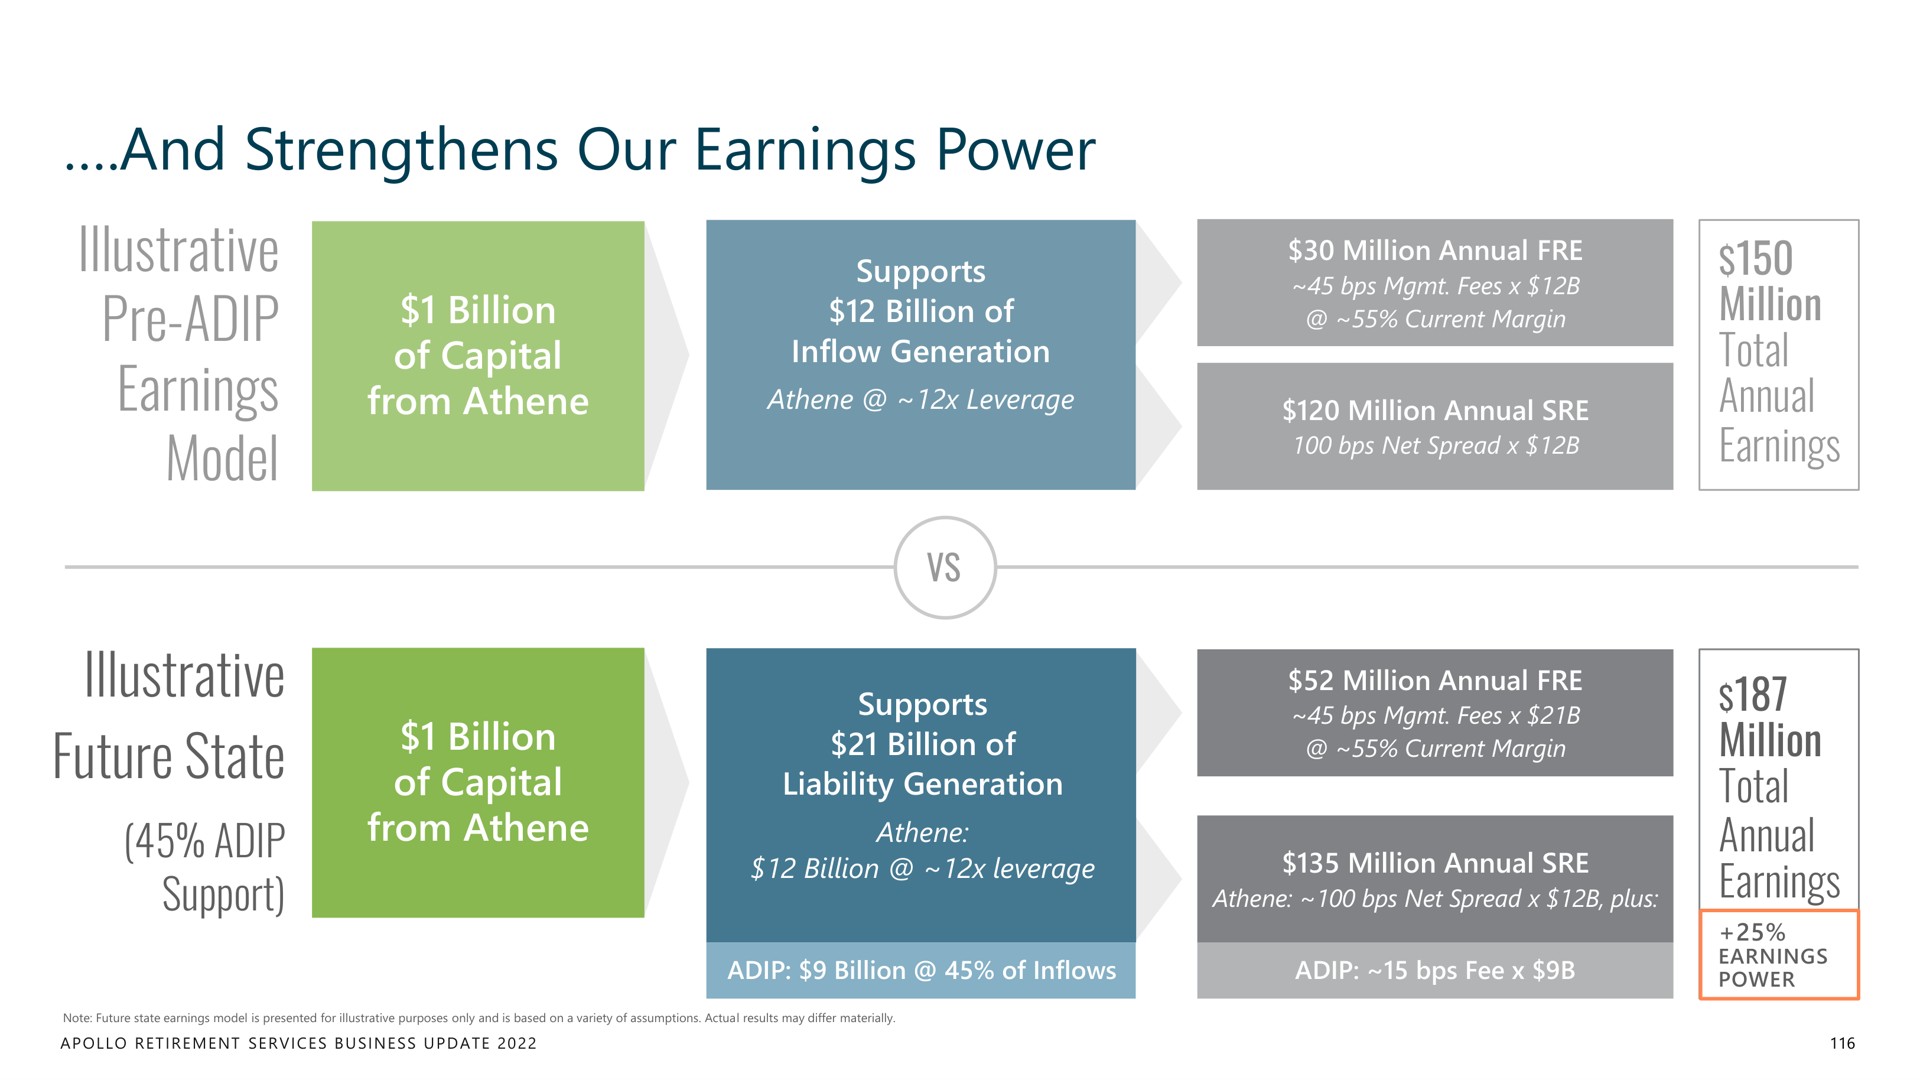 and strengthens our earnings power illustrative earnings model illustrative future state supports | Apollo Global Management